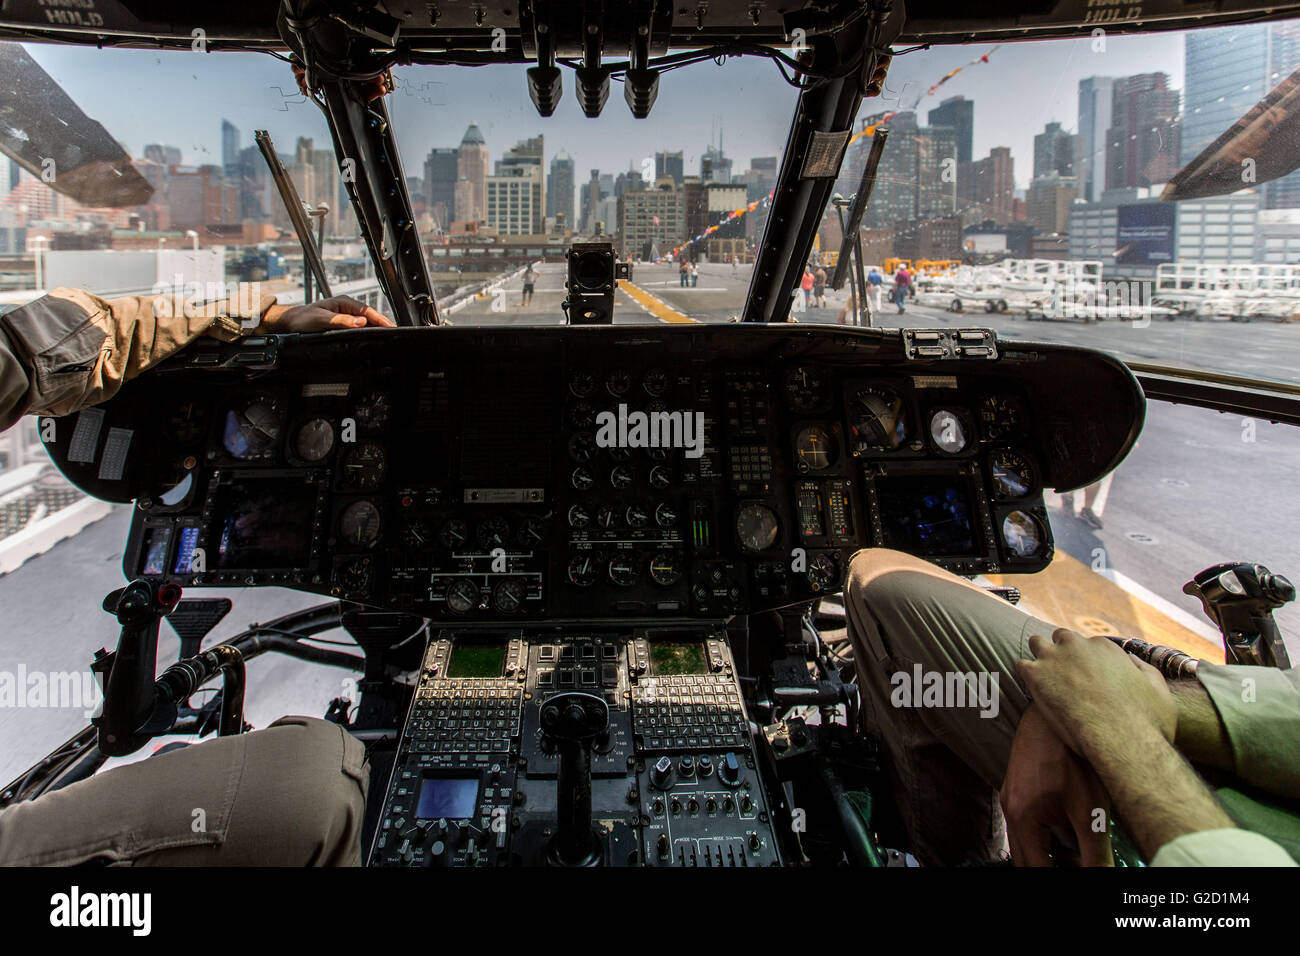 New York, USA. 27th May, 2016. New York, USA. 27th May, 2016. Photo taken on May 27, 2016, shows the cockpit of a Sikorsky CH-53E Super Stallion helicopter on board the USS Bataan (LHD-5), Wasp-class amphibious assault ship, during the 28th Annual New York Fleet Week in New York, the United States. New York Fleet Week takes place from May 25 to May 30, where hundred of service men and women in the Armed Forces visit New York City as part of Memorial Day commemorations. Credit:  Li Muzi/Xinhua/Alamy Live News Stock Photo